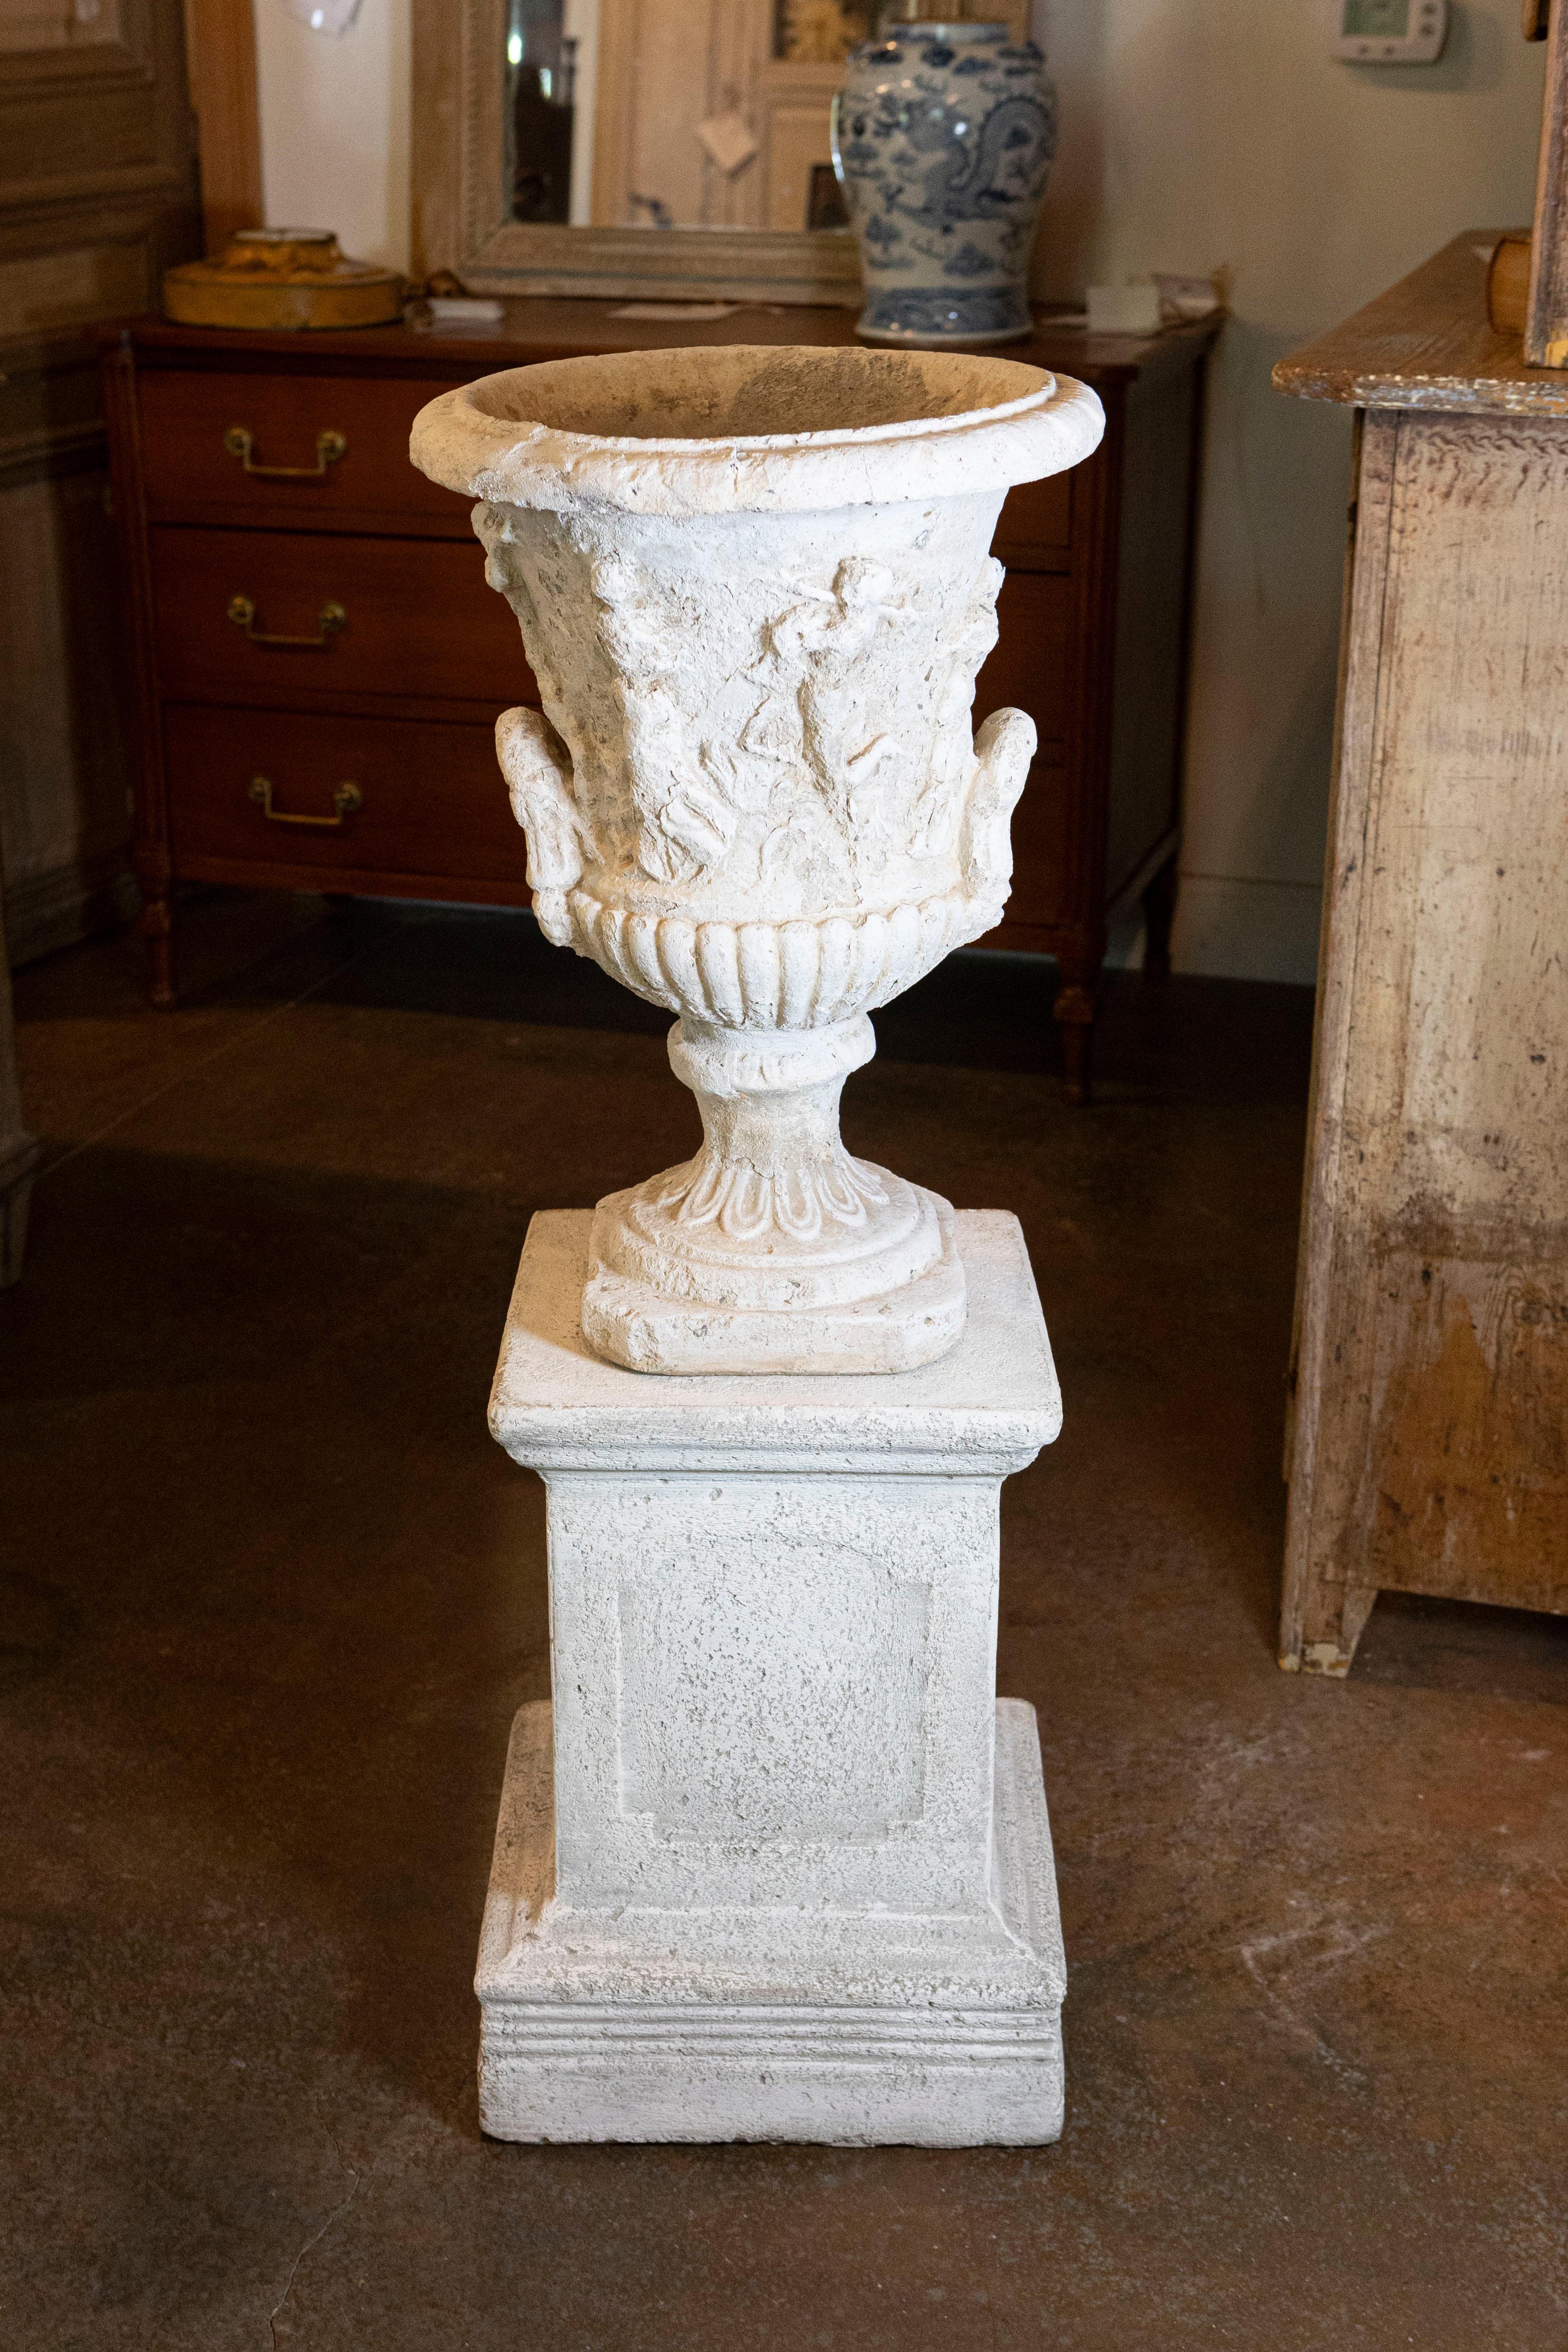 A French stone Provençale jardinière from the second half of the 19th century, with low-relief carved scenes and handles. Born in Provence at the end of the reign of France's last Emperor Napoleon III, this jardinière reflects its influence of the